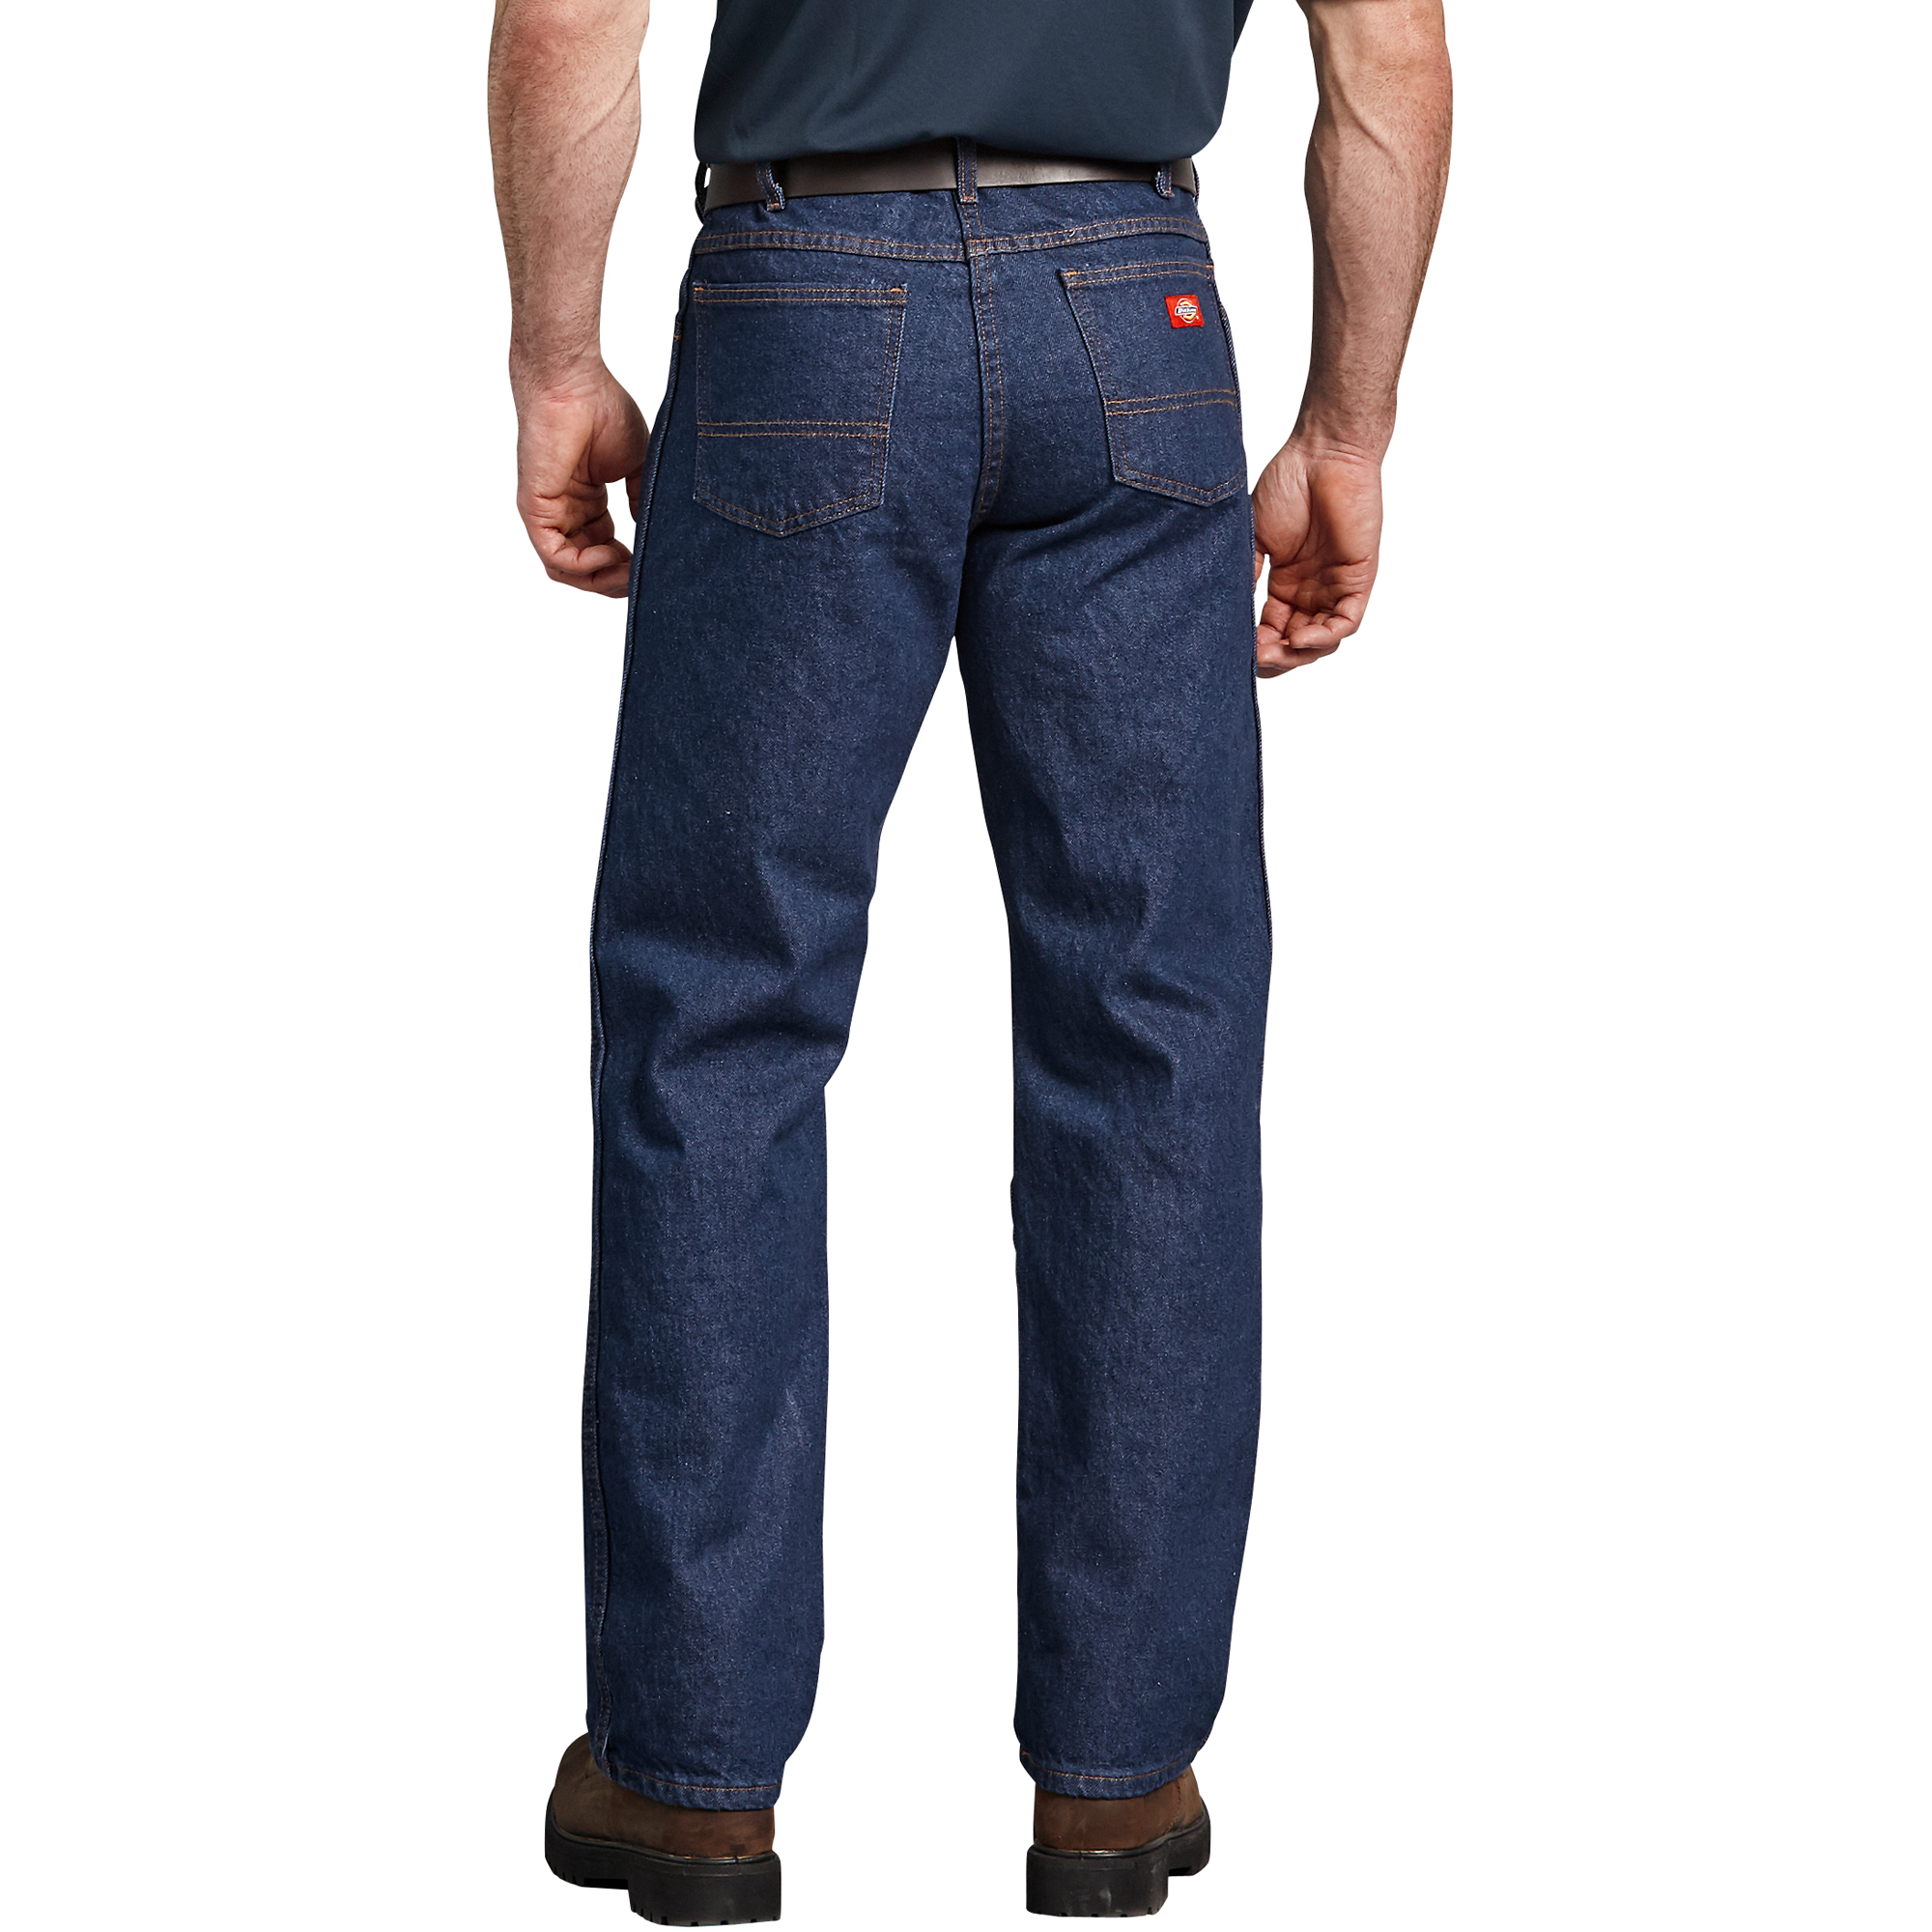 Dickies Industrial Regular Fit Jeans | Prudential Overall Supply